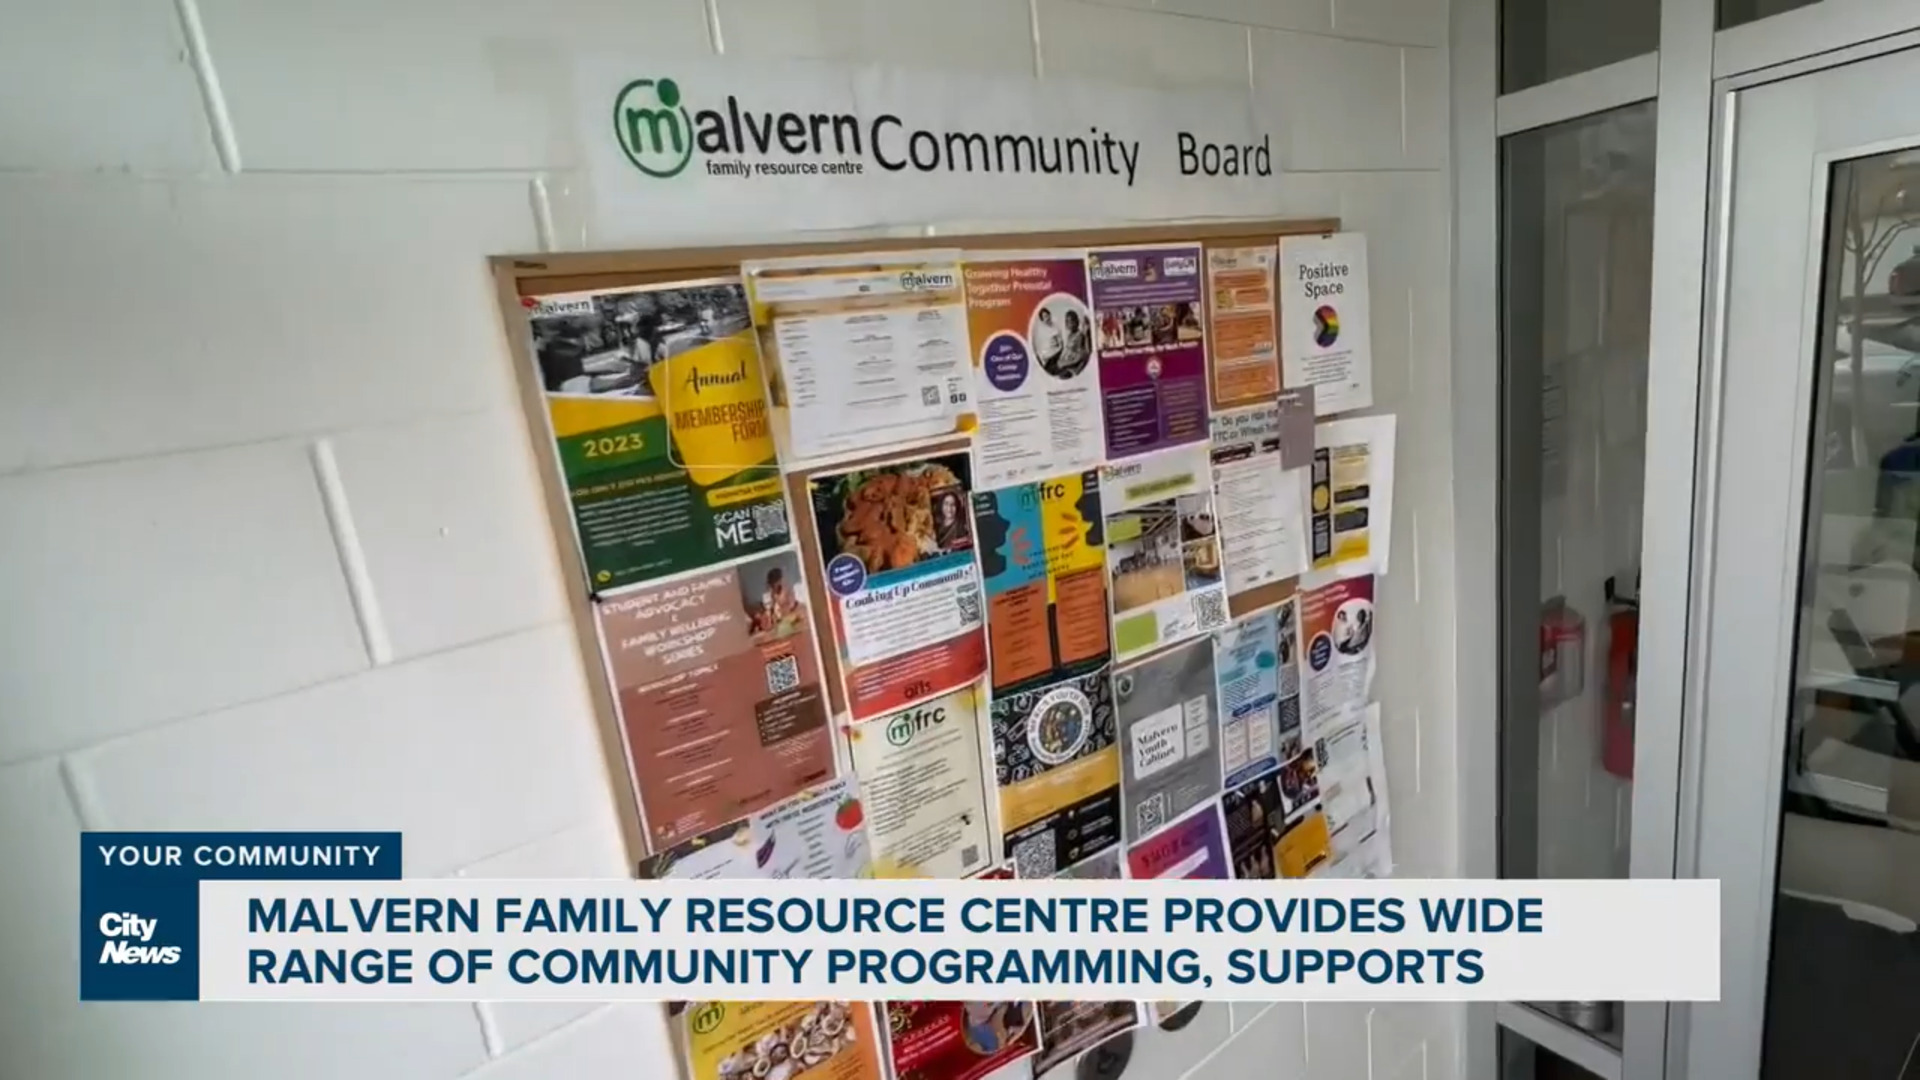 Malvern Family Resource Centre provides various supports, programming